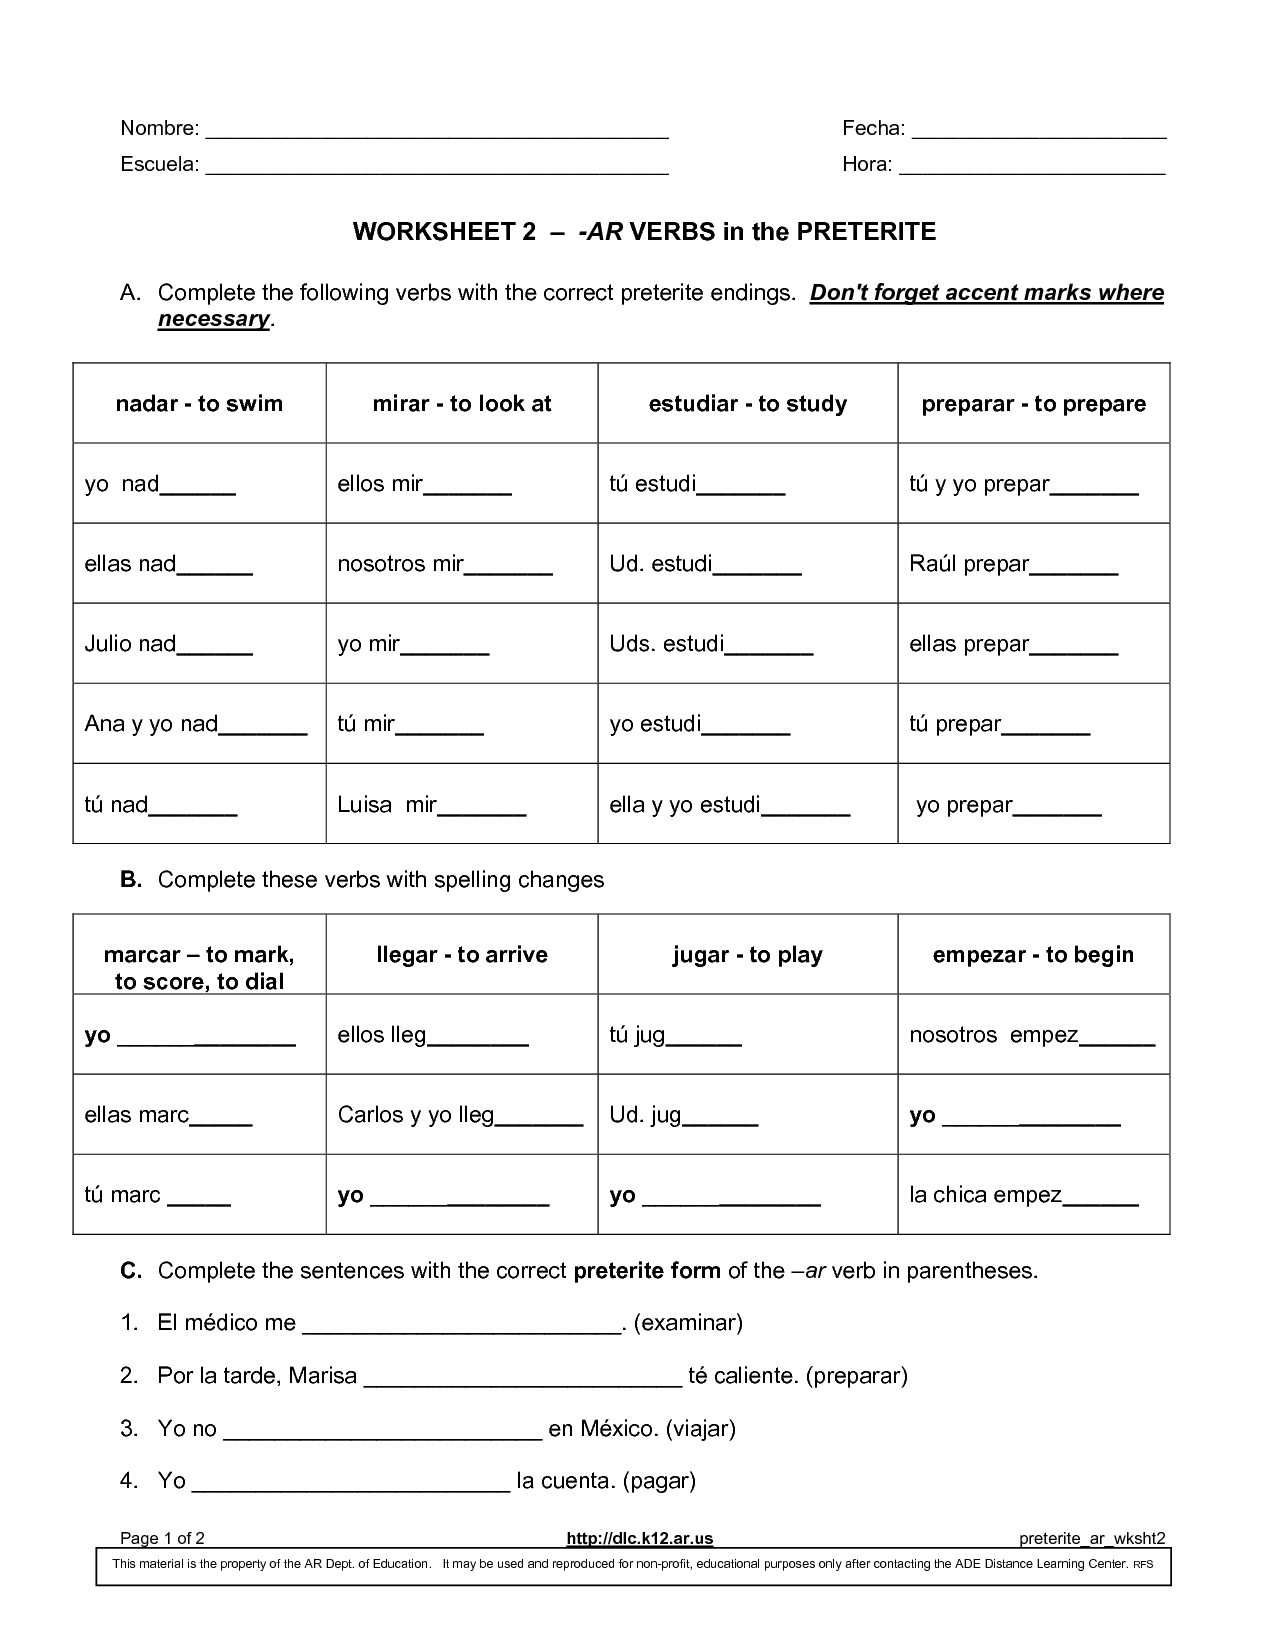 other-worksheet-category-page-677-worksheeto